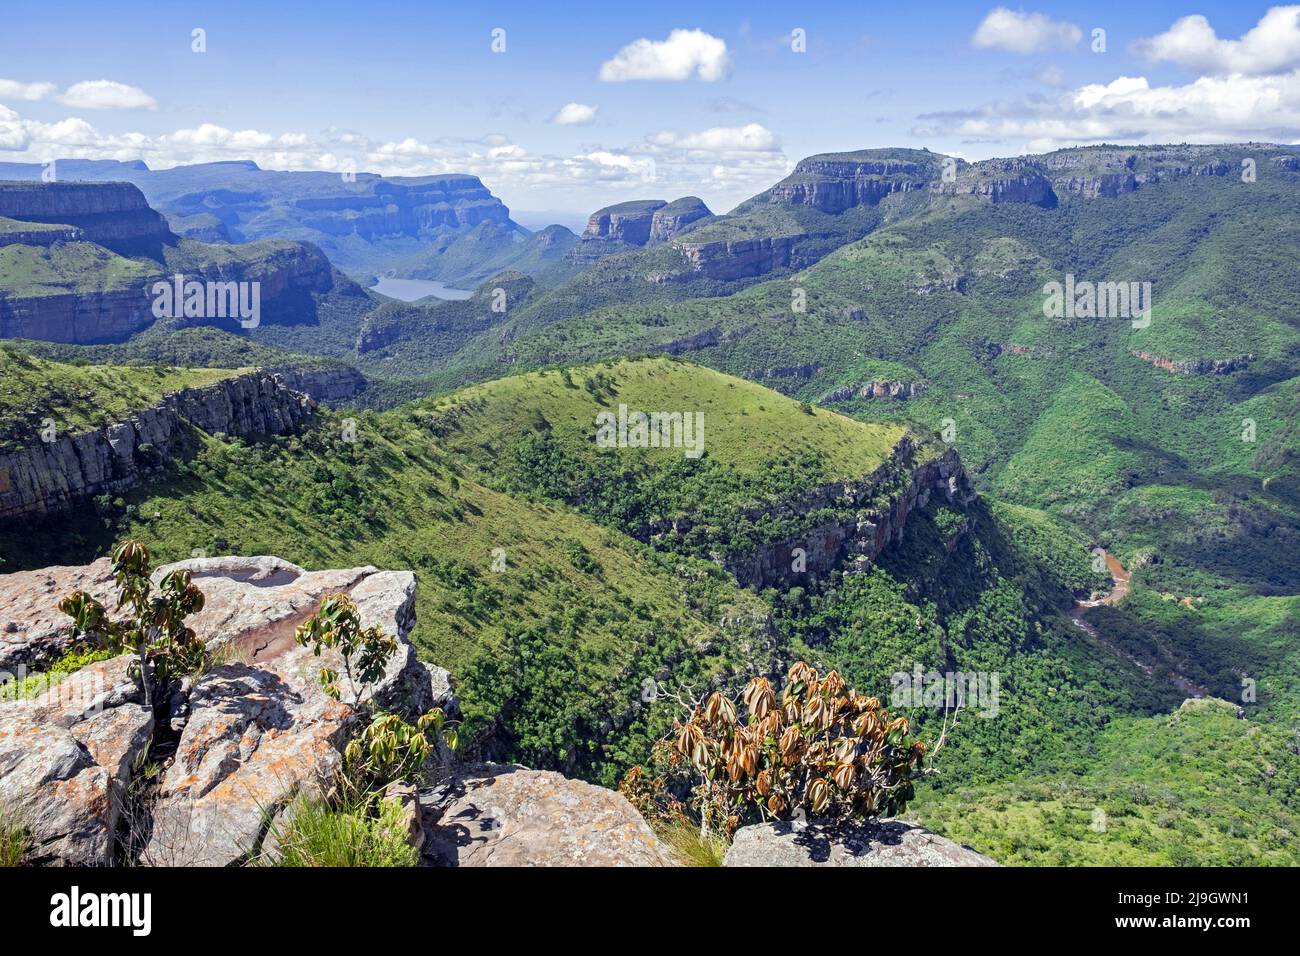 View from Lowveld Viewpoint over the Blyde River Canyon / Blyderivierspoort, Mpumalanga province, South Africa Stock Photo